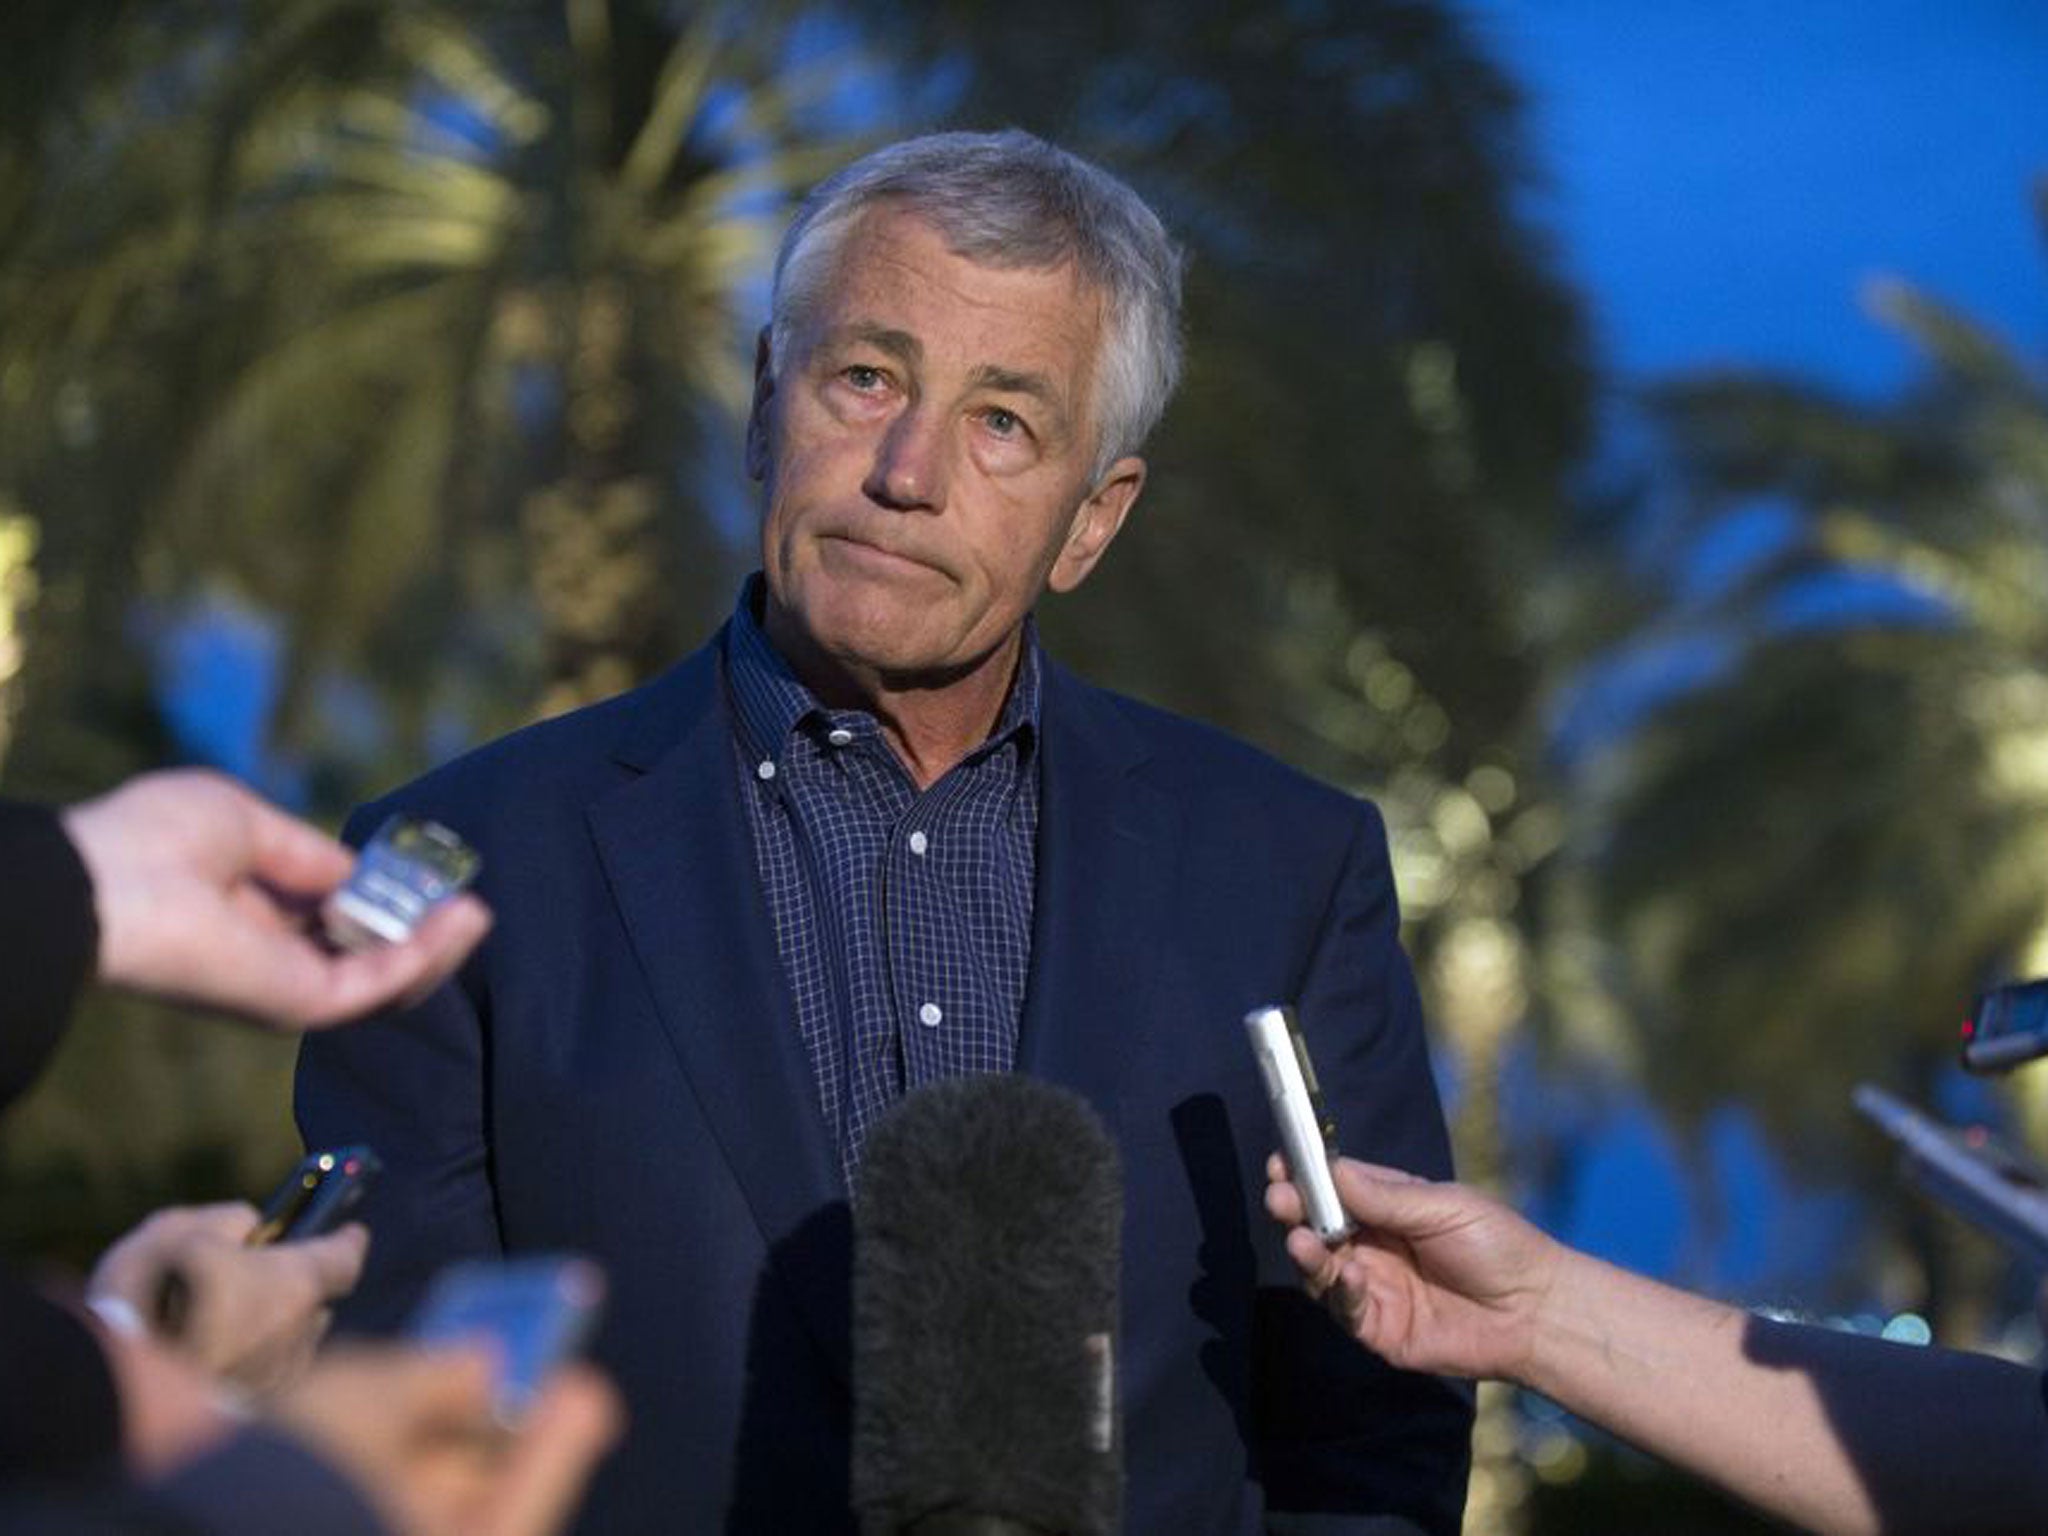 US Secretary of Defense Chuck Hagel speaks with reporters after reading a statement on chemical weapon use in Syria